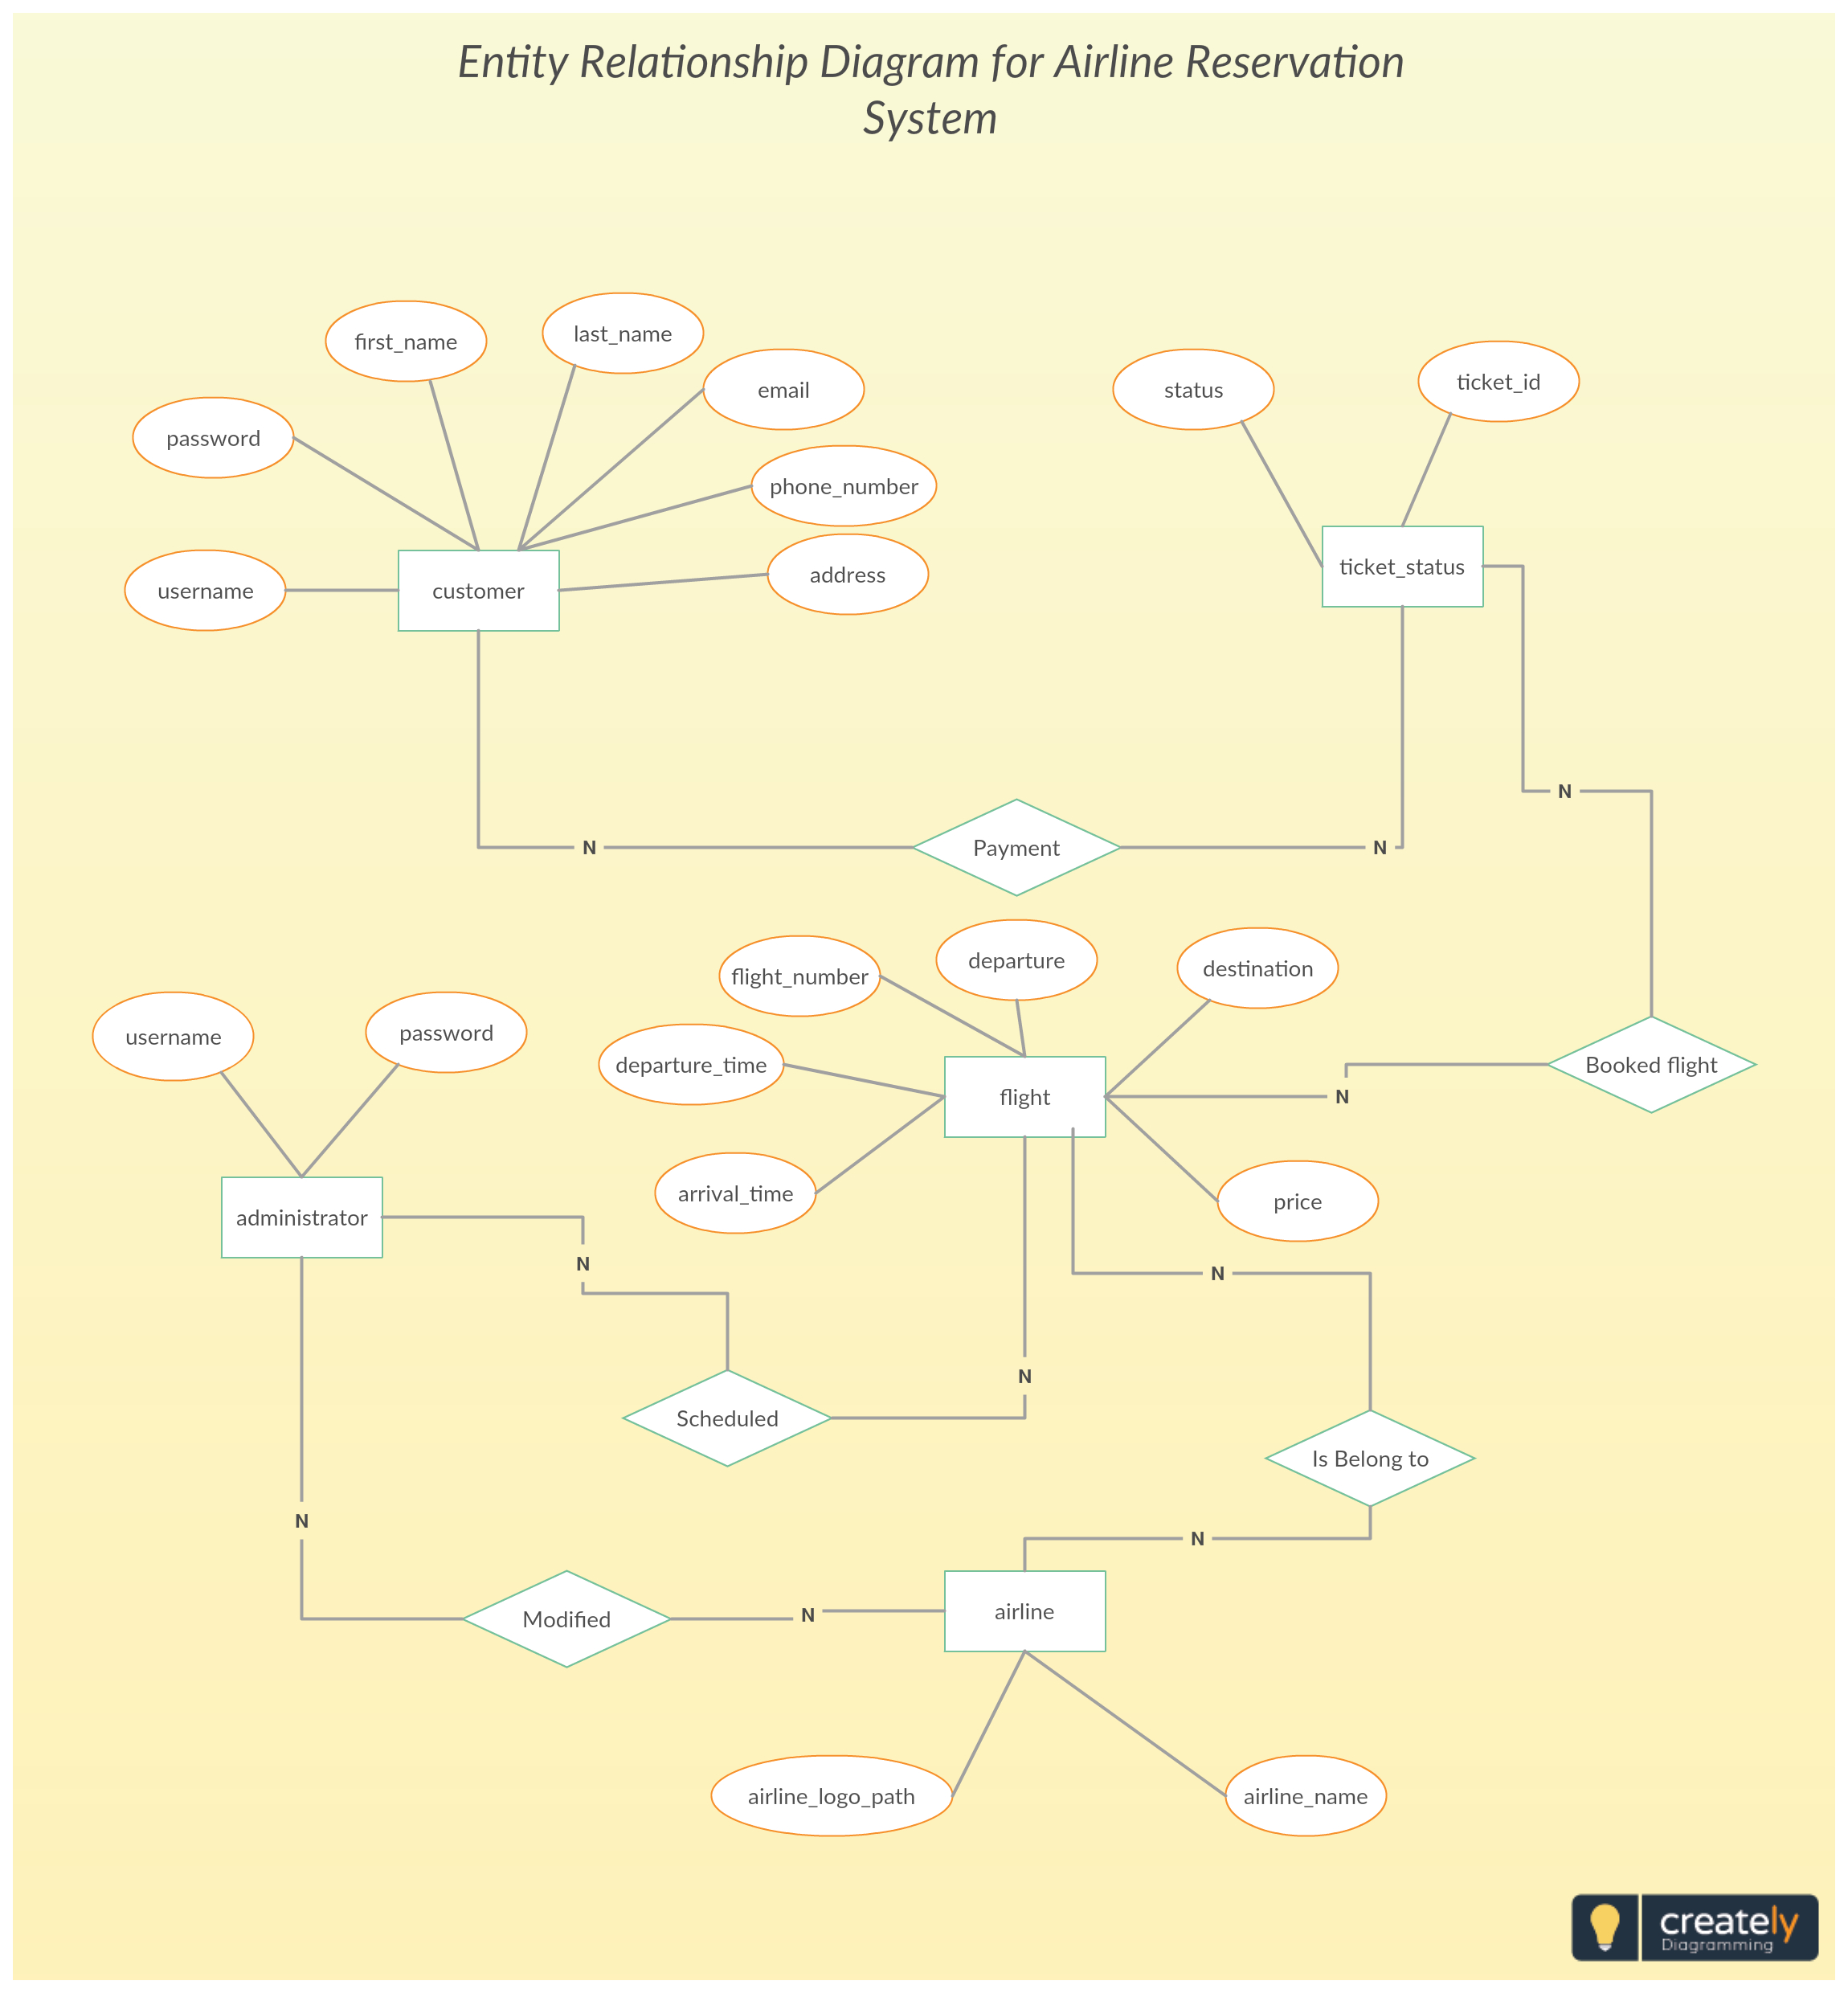 Entity Relationship Diagram For Airline Reservation System pertaining to Define Entity Relationship Diagram